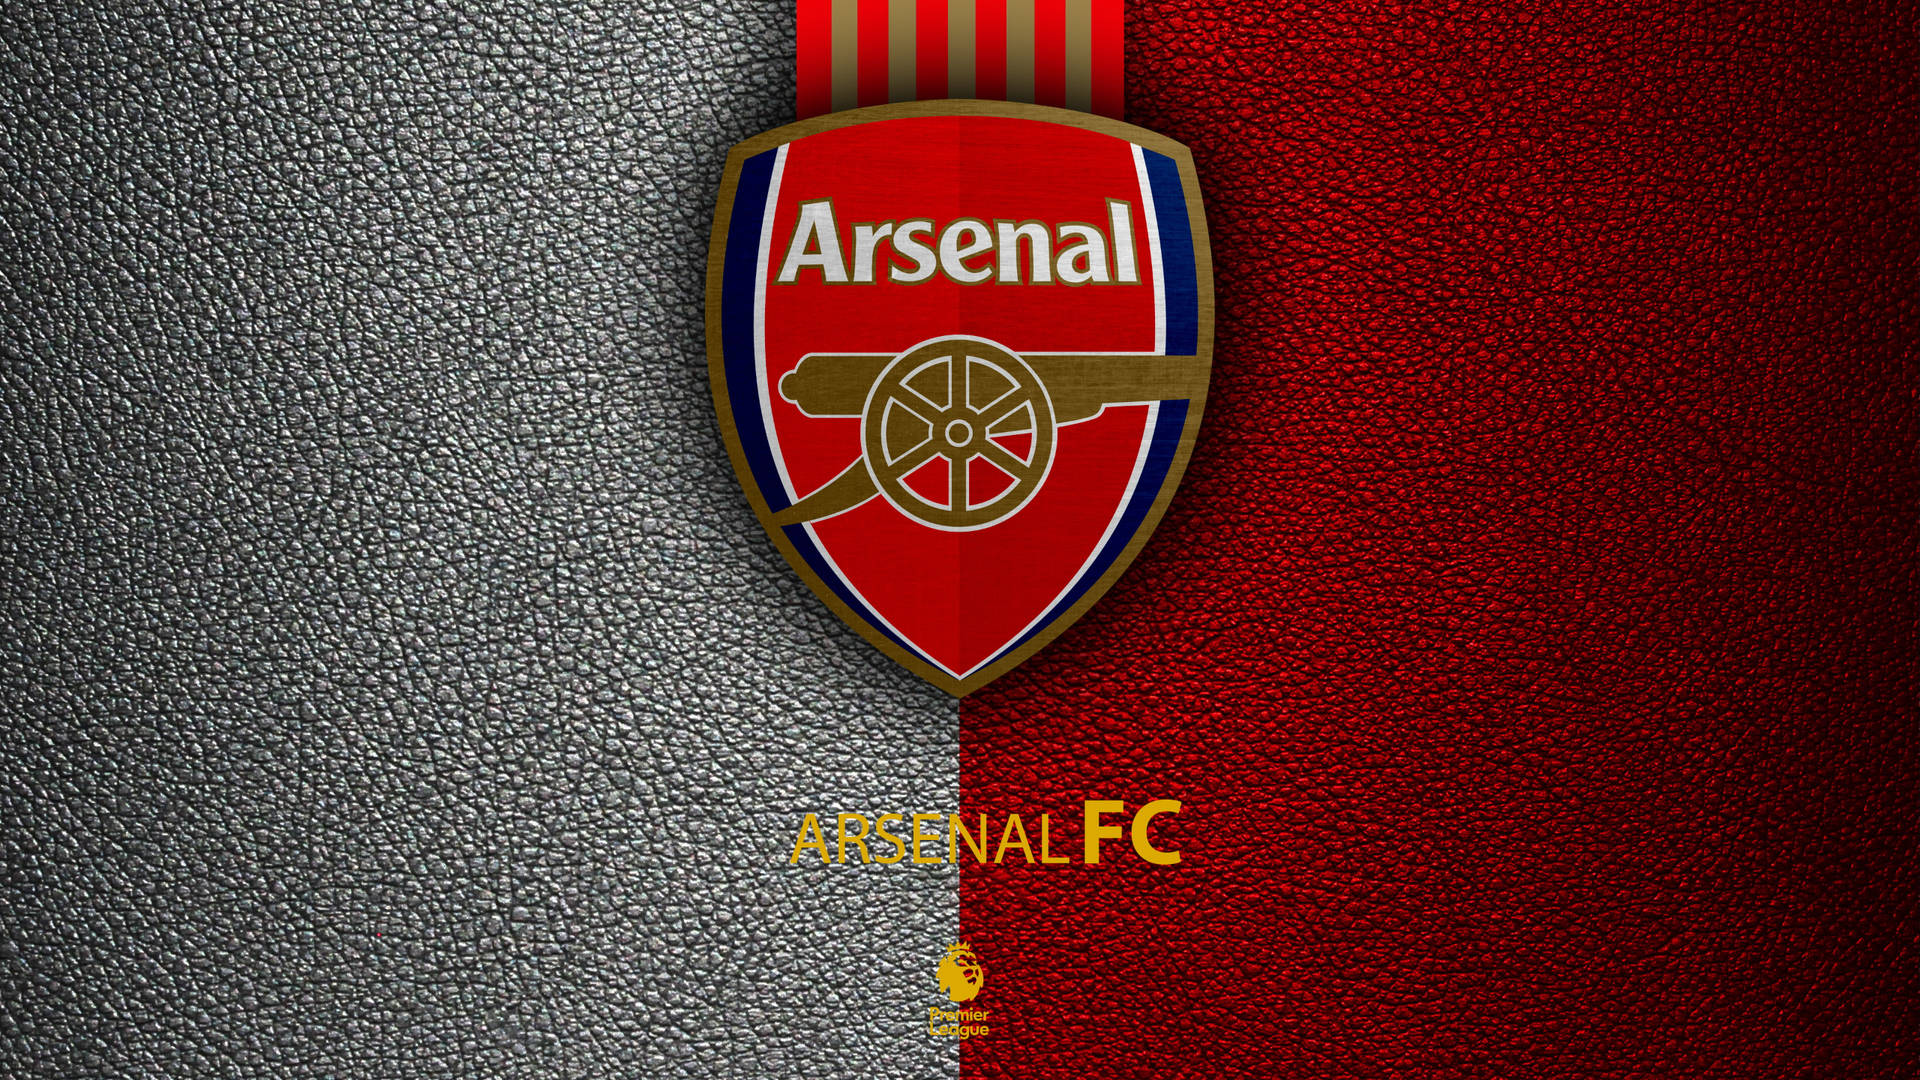 Arsenal On Red And Gray Leather Background